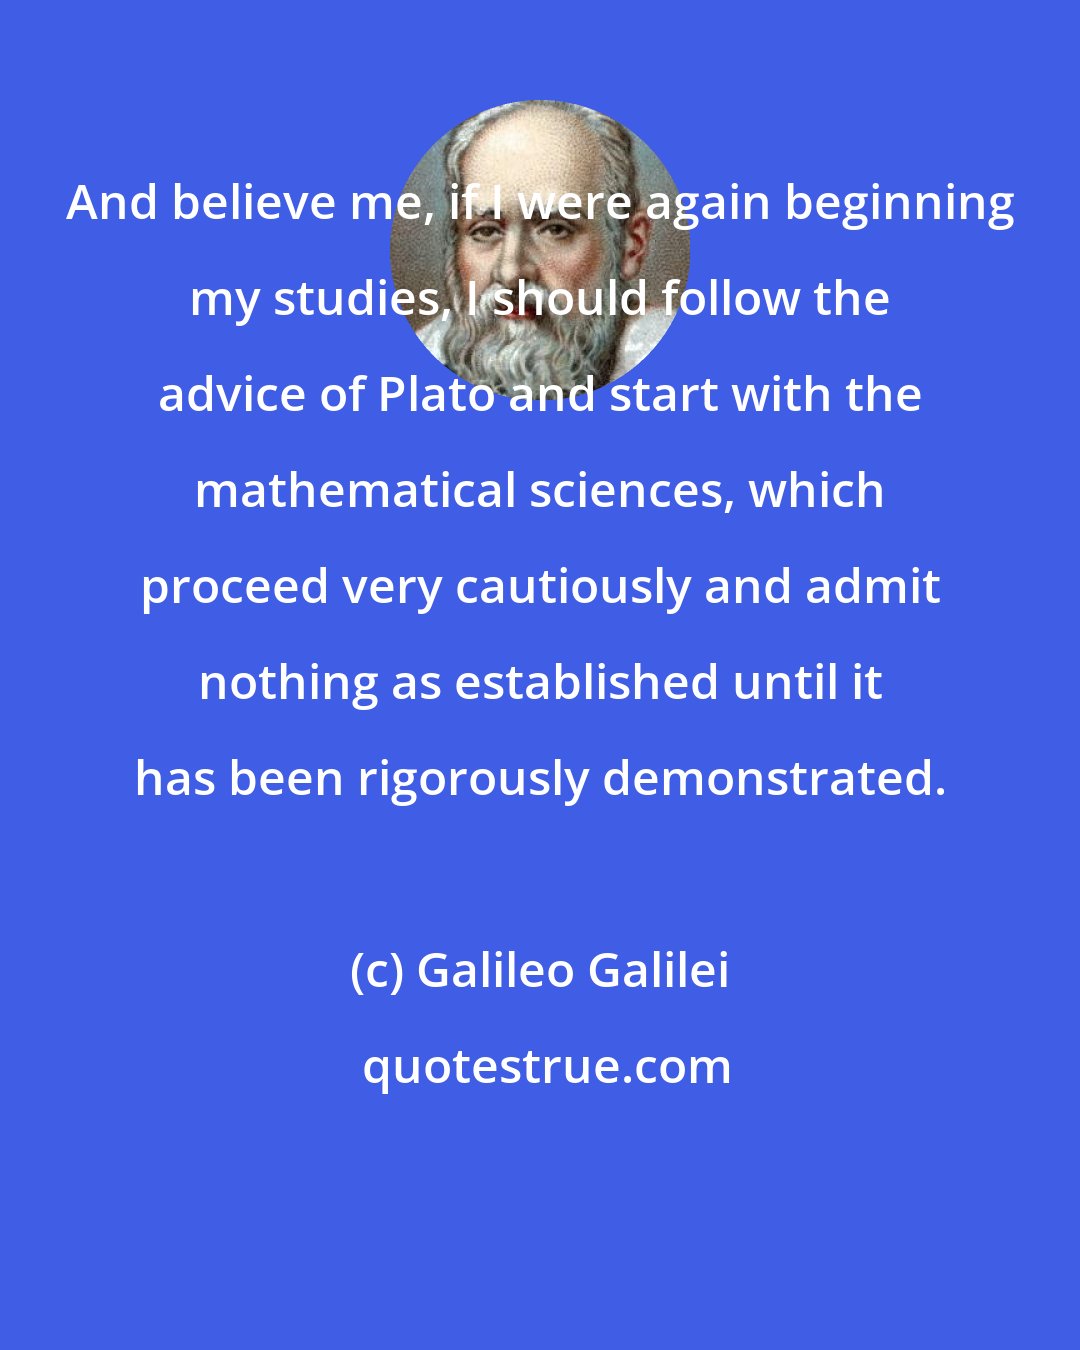 Galileo Galilei: And believe me, if I were again beginning my studies, I should follow the advice of Plato and start with the mathematical sciences, which proceed very cautiously and admit nothing as established until it has been rigorously demonstrated.